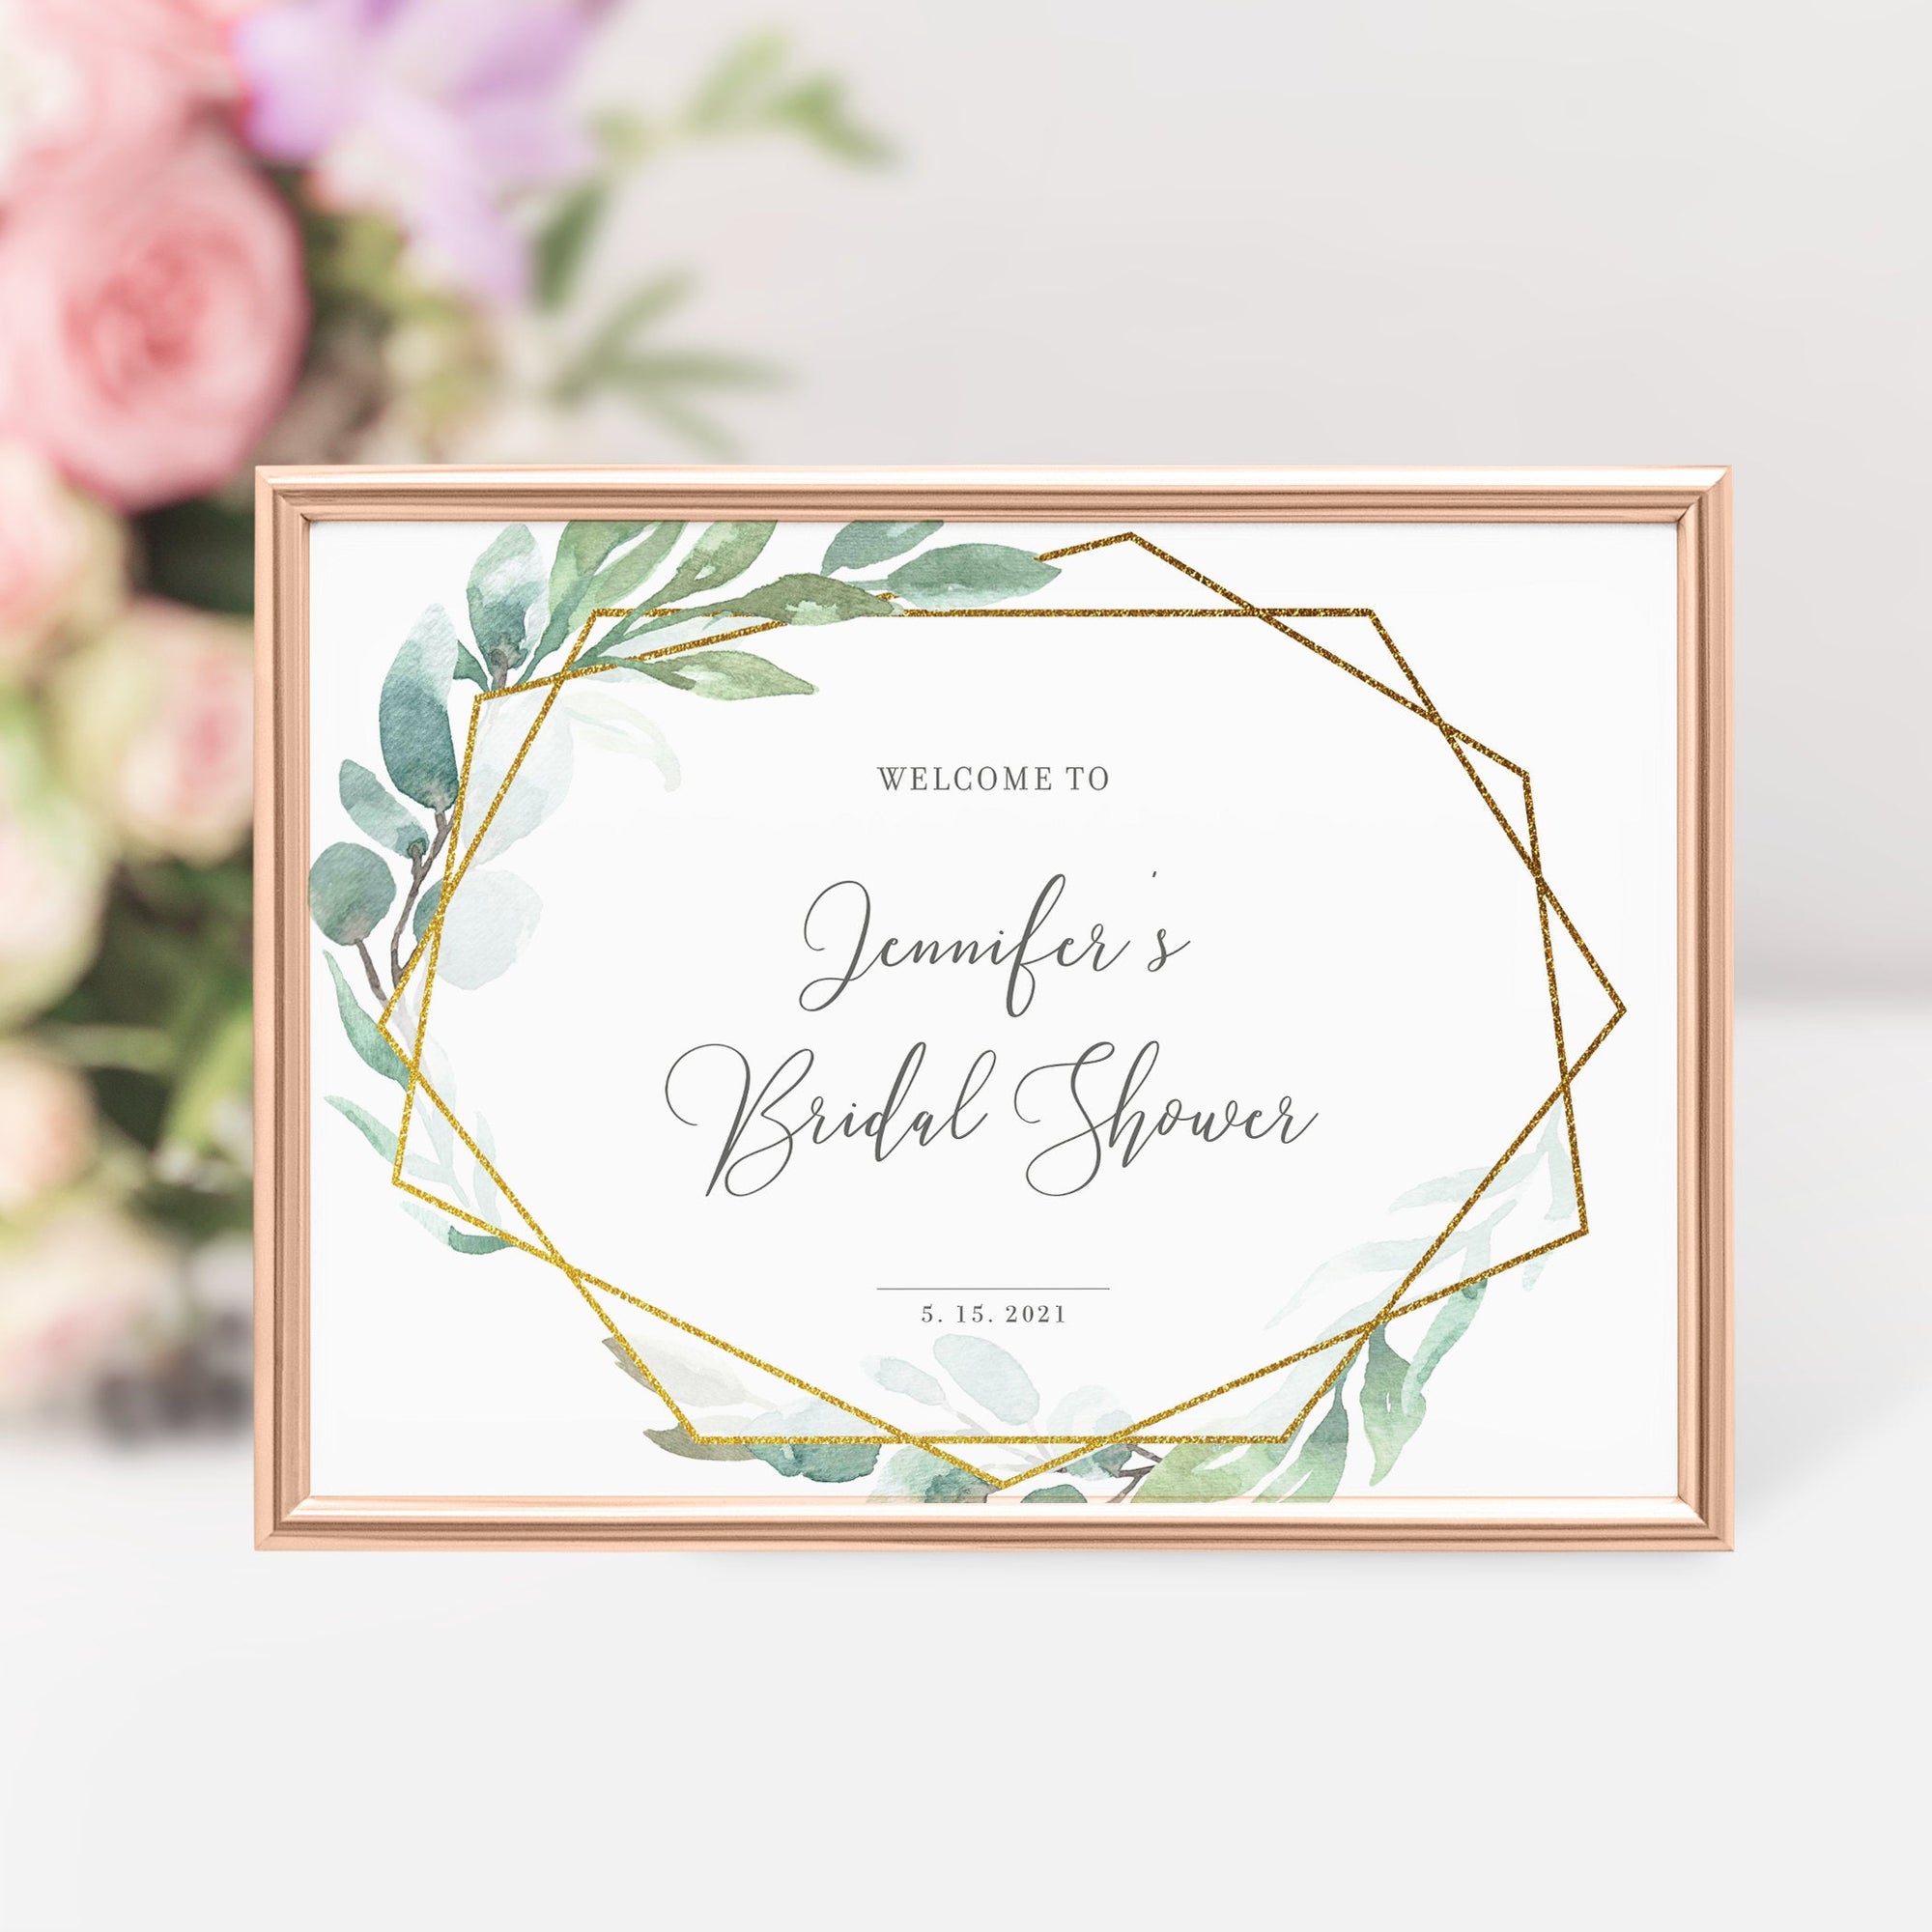 Greenery Bridal Shower Welcome Sign Template, Large Welcome Sign Printable, Bridal Shower Decorations Greenery, DIGITAL DOWNLOAD - GFG100